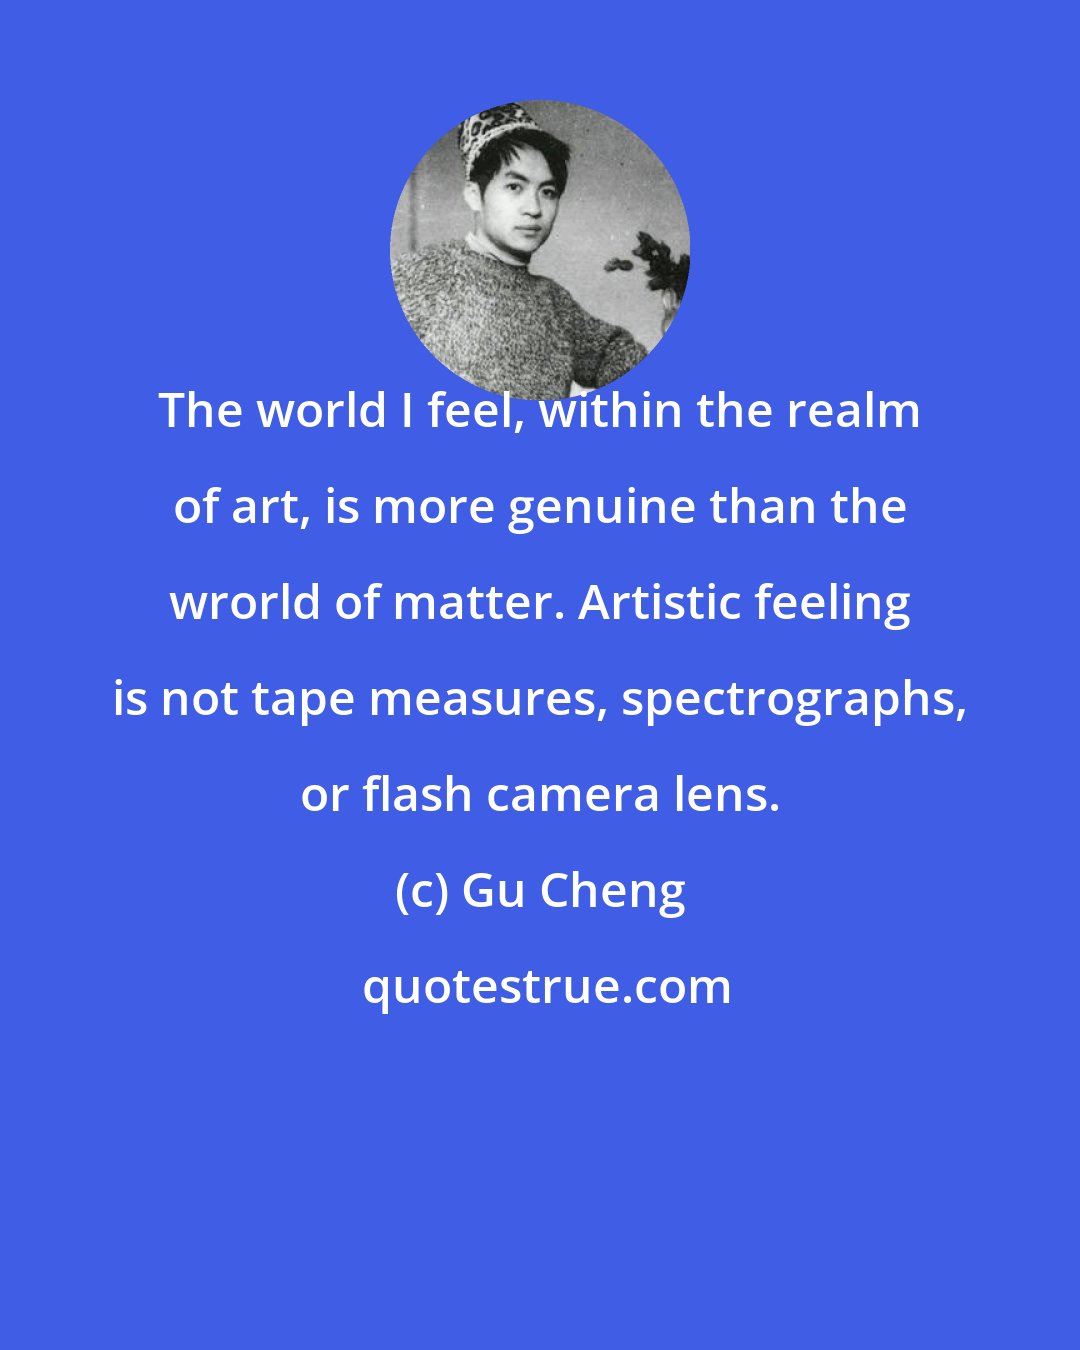 Gu Cheng: The world I feel, within the realm of art, is more genuine than the wrorld of matter. Artistic feeling is not tape measures, spectrographs, or flash camera lens.